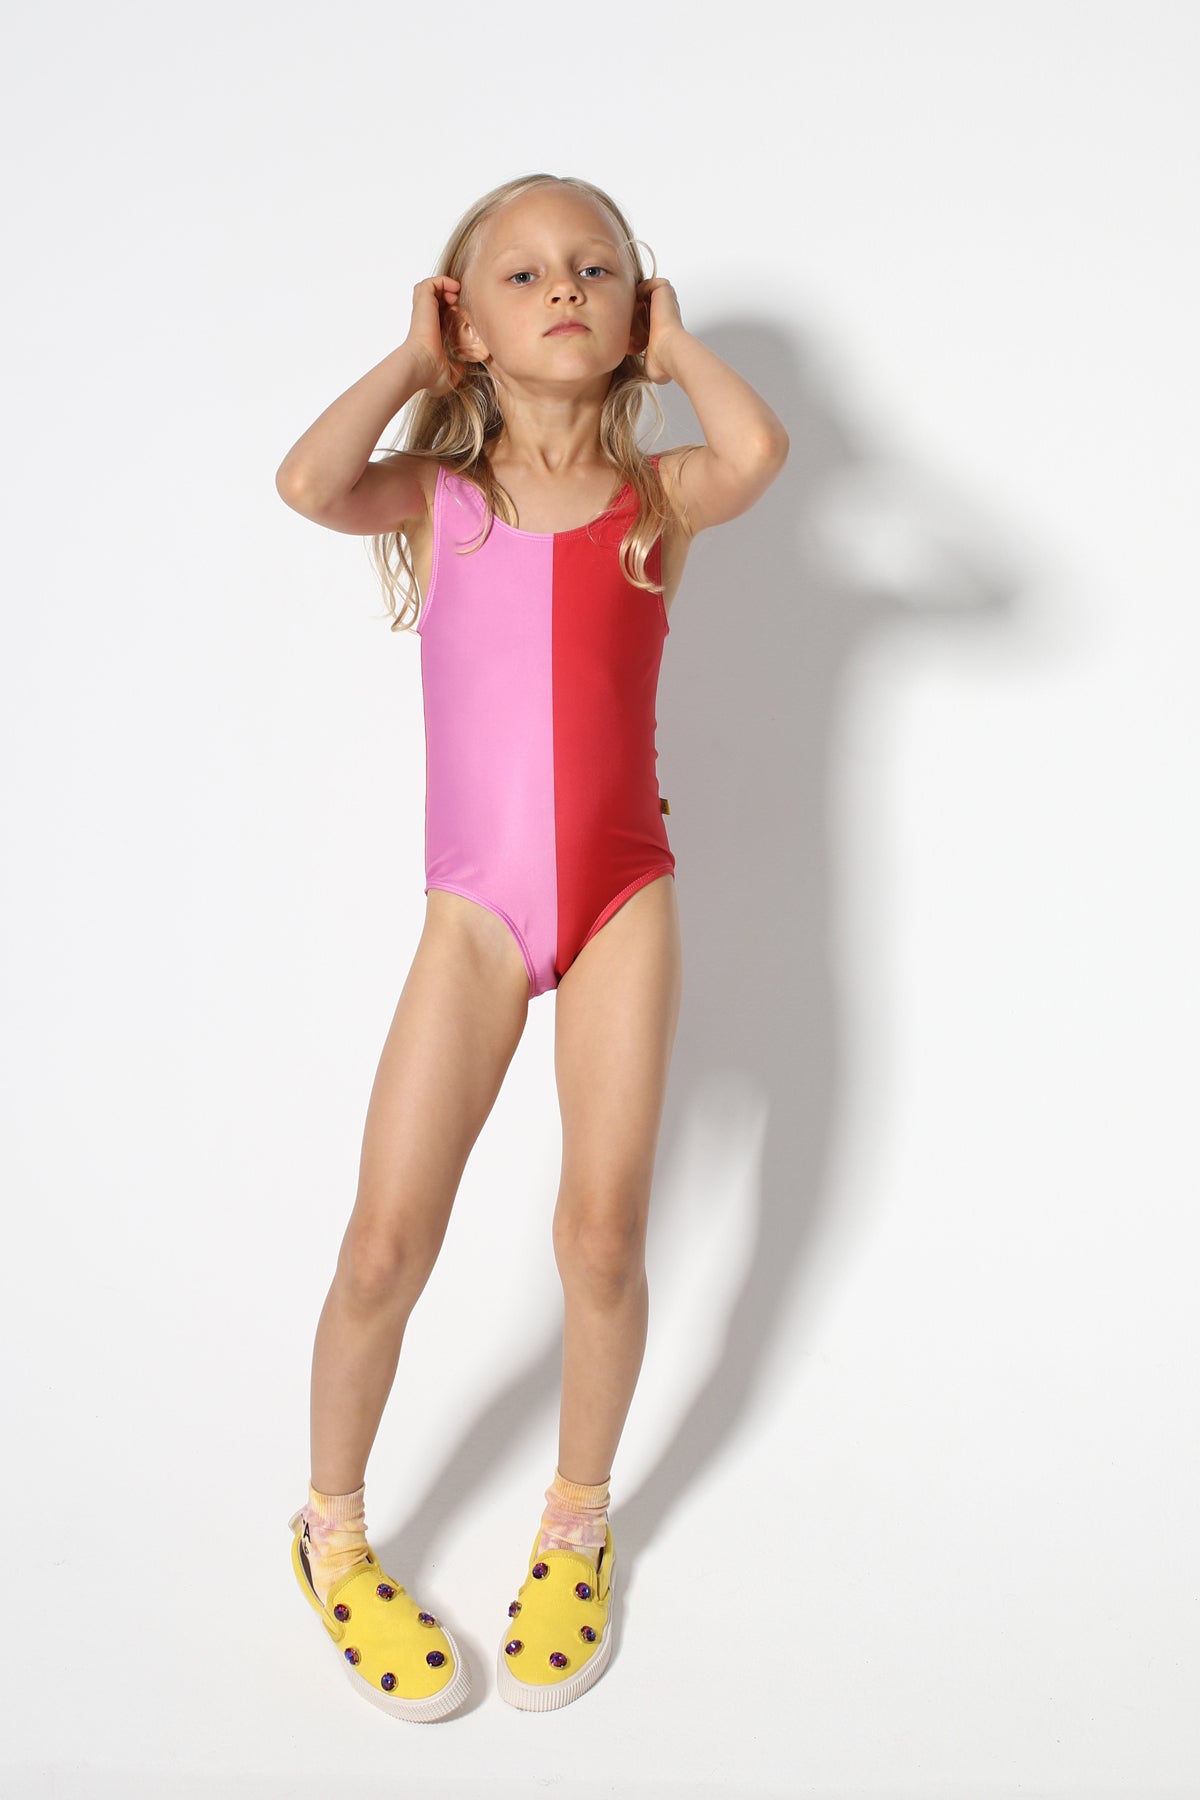 RED AND PINK SWIMSUIT makids